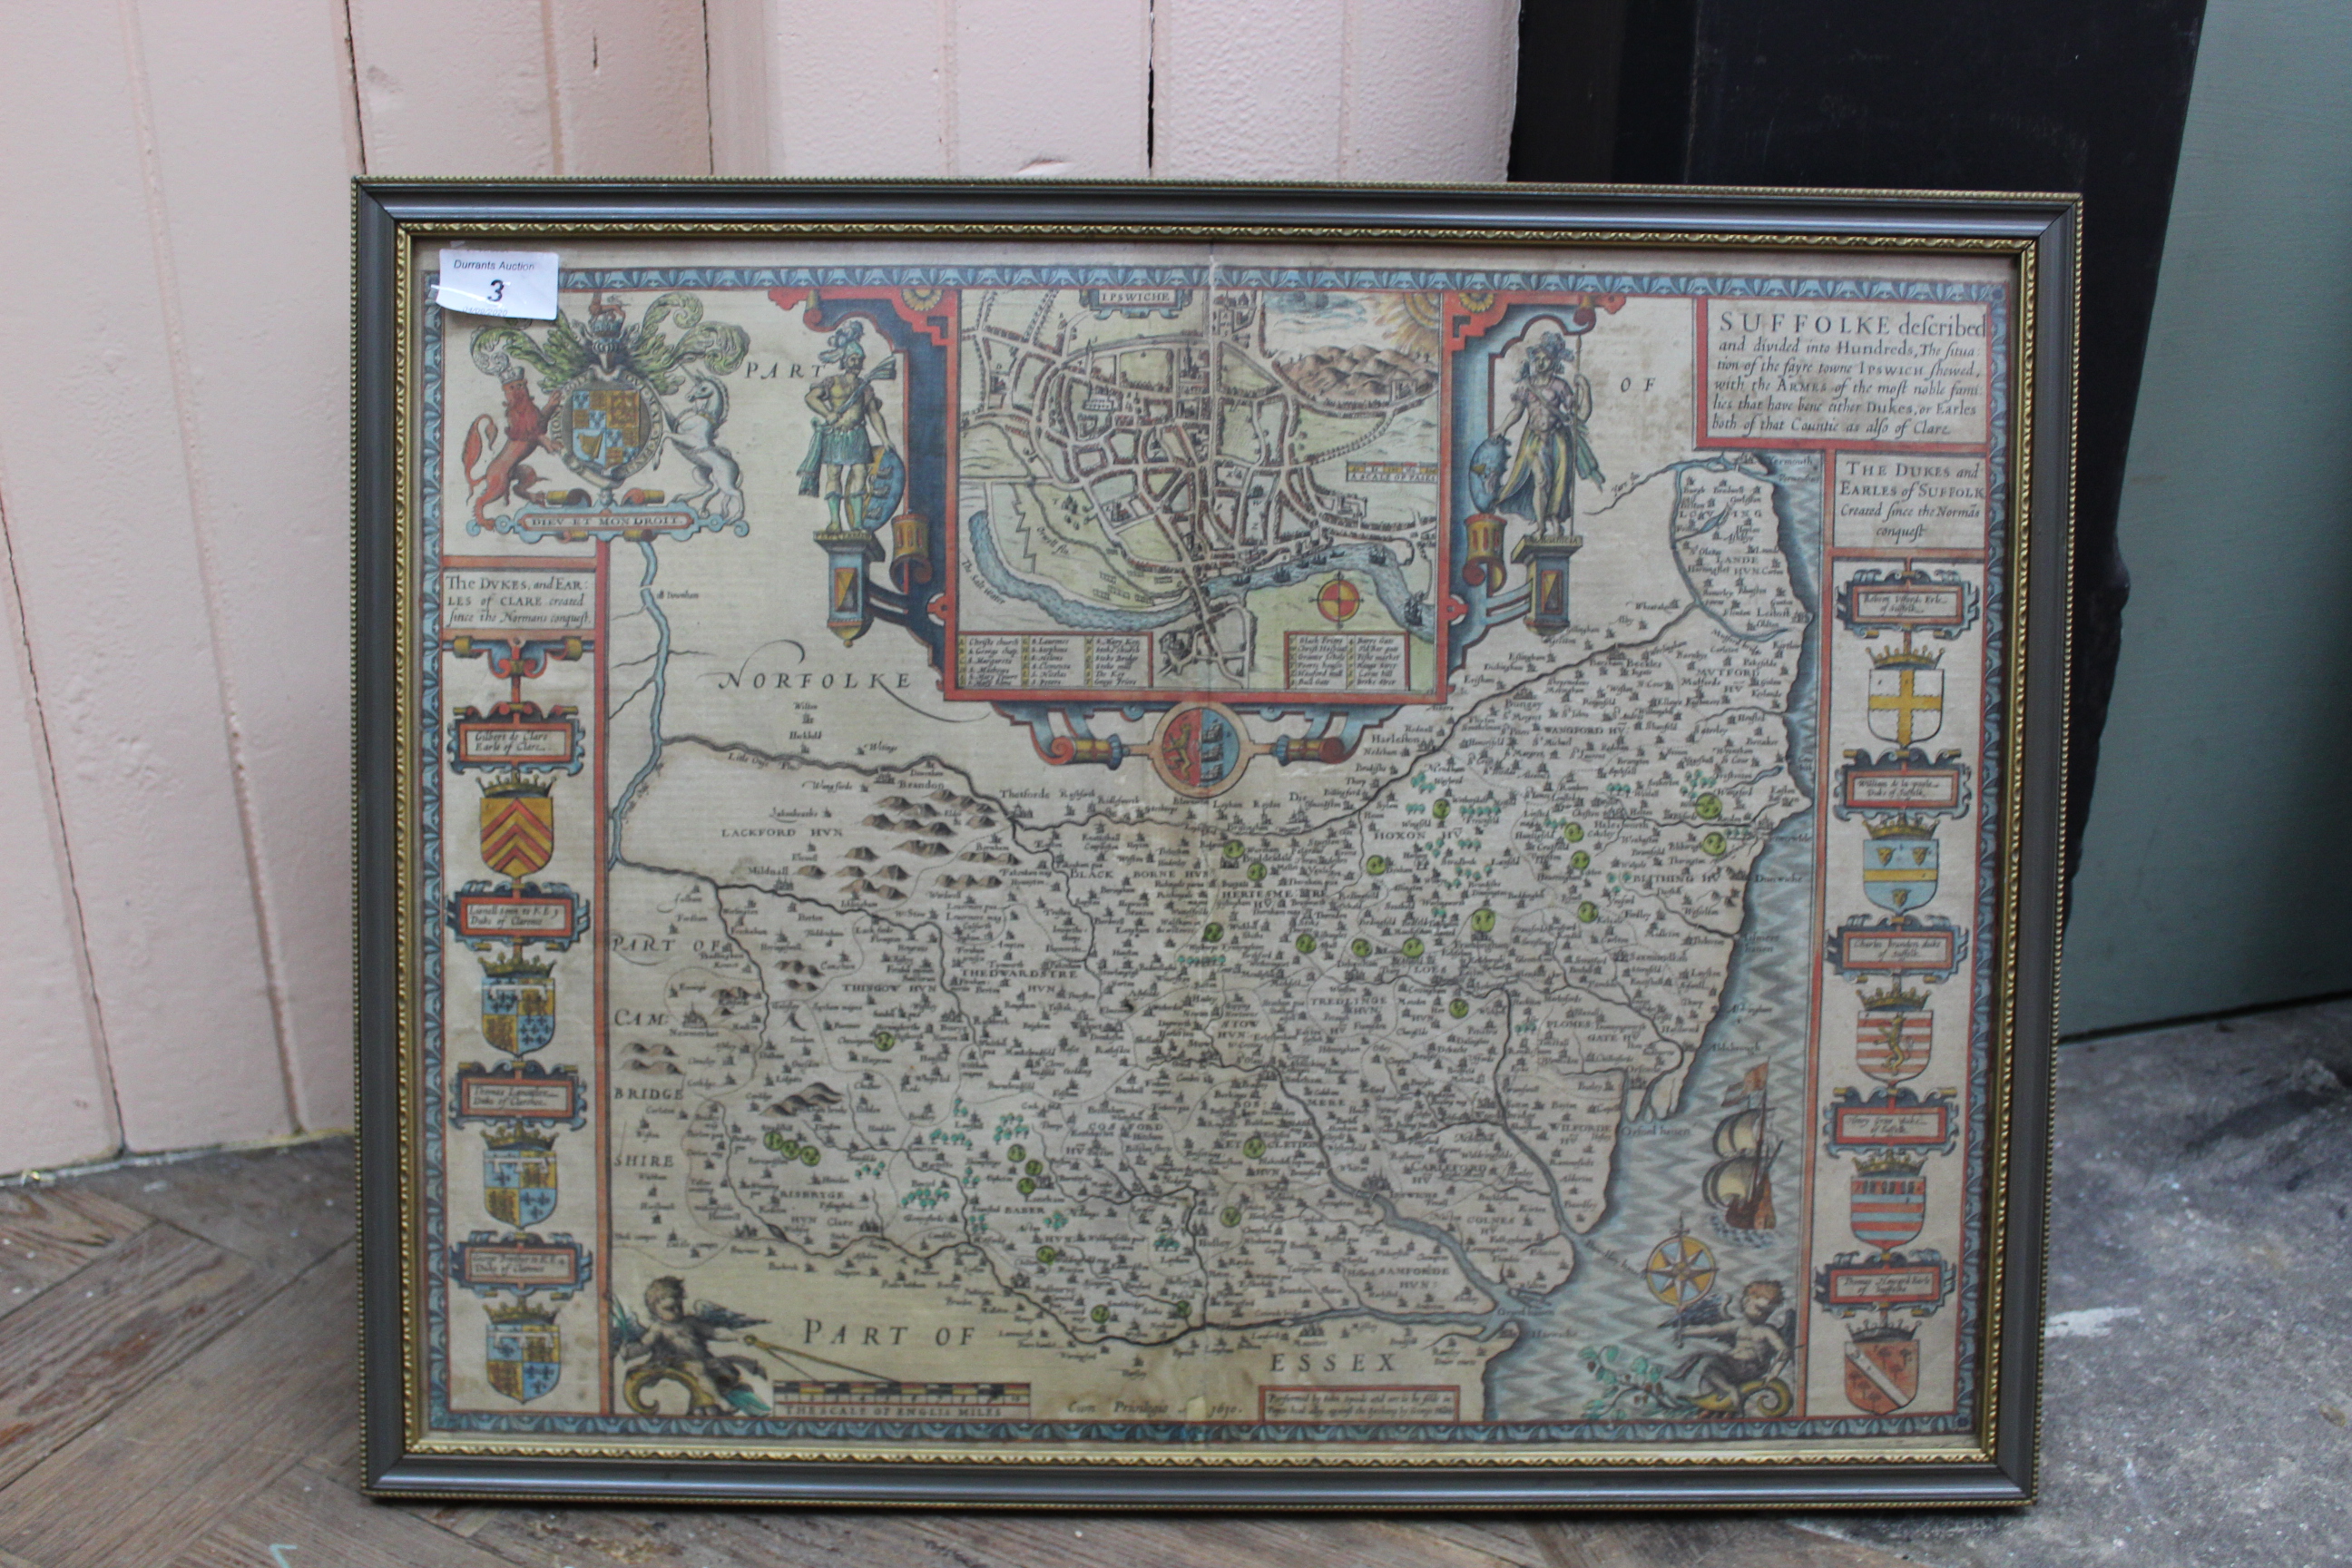 A map of Suffolk by John Speede 1610 with Arms of the most prominent families of the country,